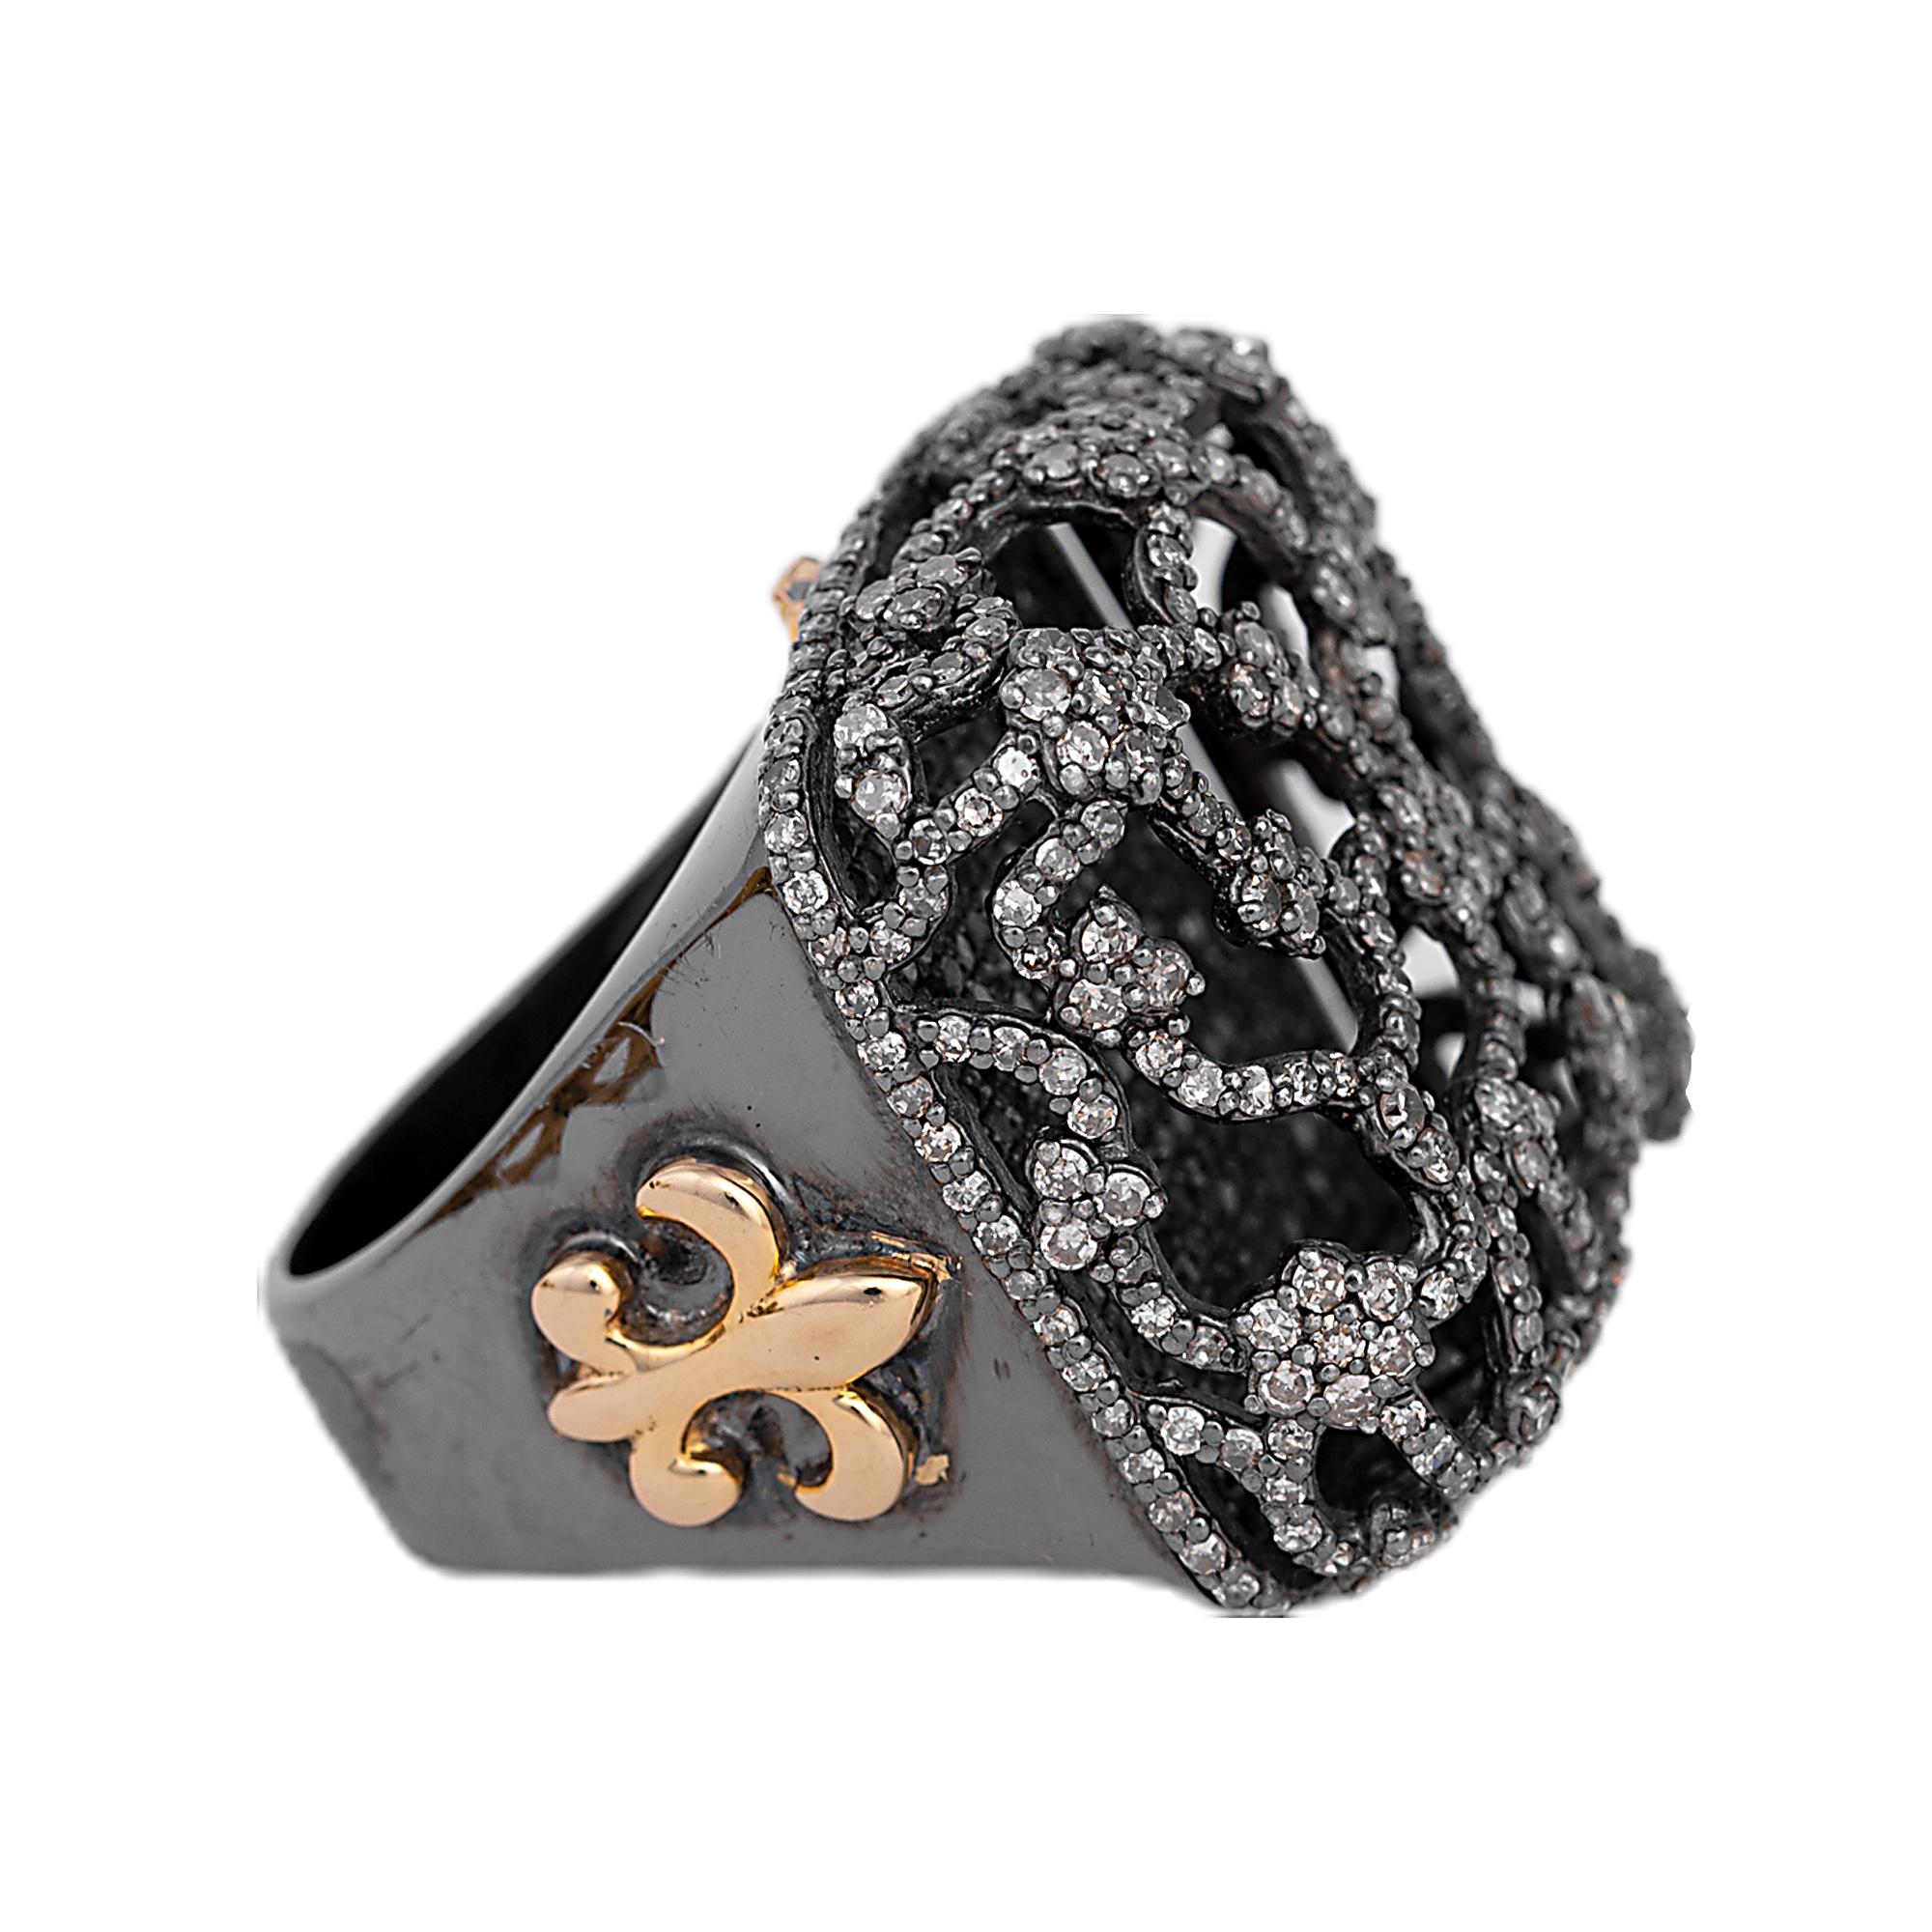 10.30 Carat Diamond Cocktail Ring in Victorian Style

This Victorian period art-deco style fabulous black and white diamond ring is exceptional. The transformational design with the pave set round black diamonds forming the ring’s base covering it